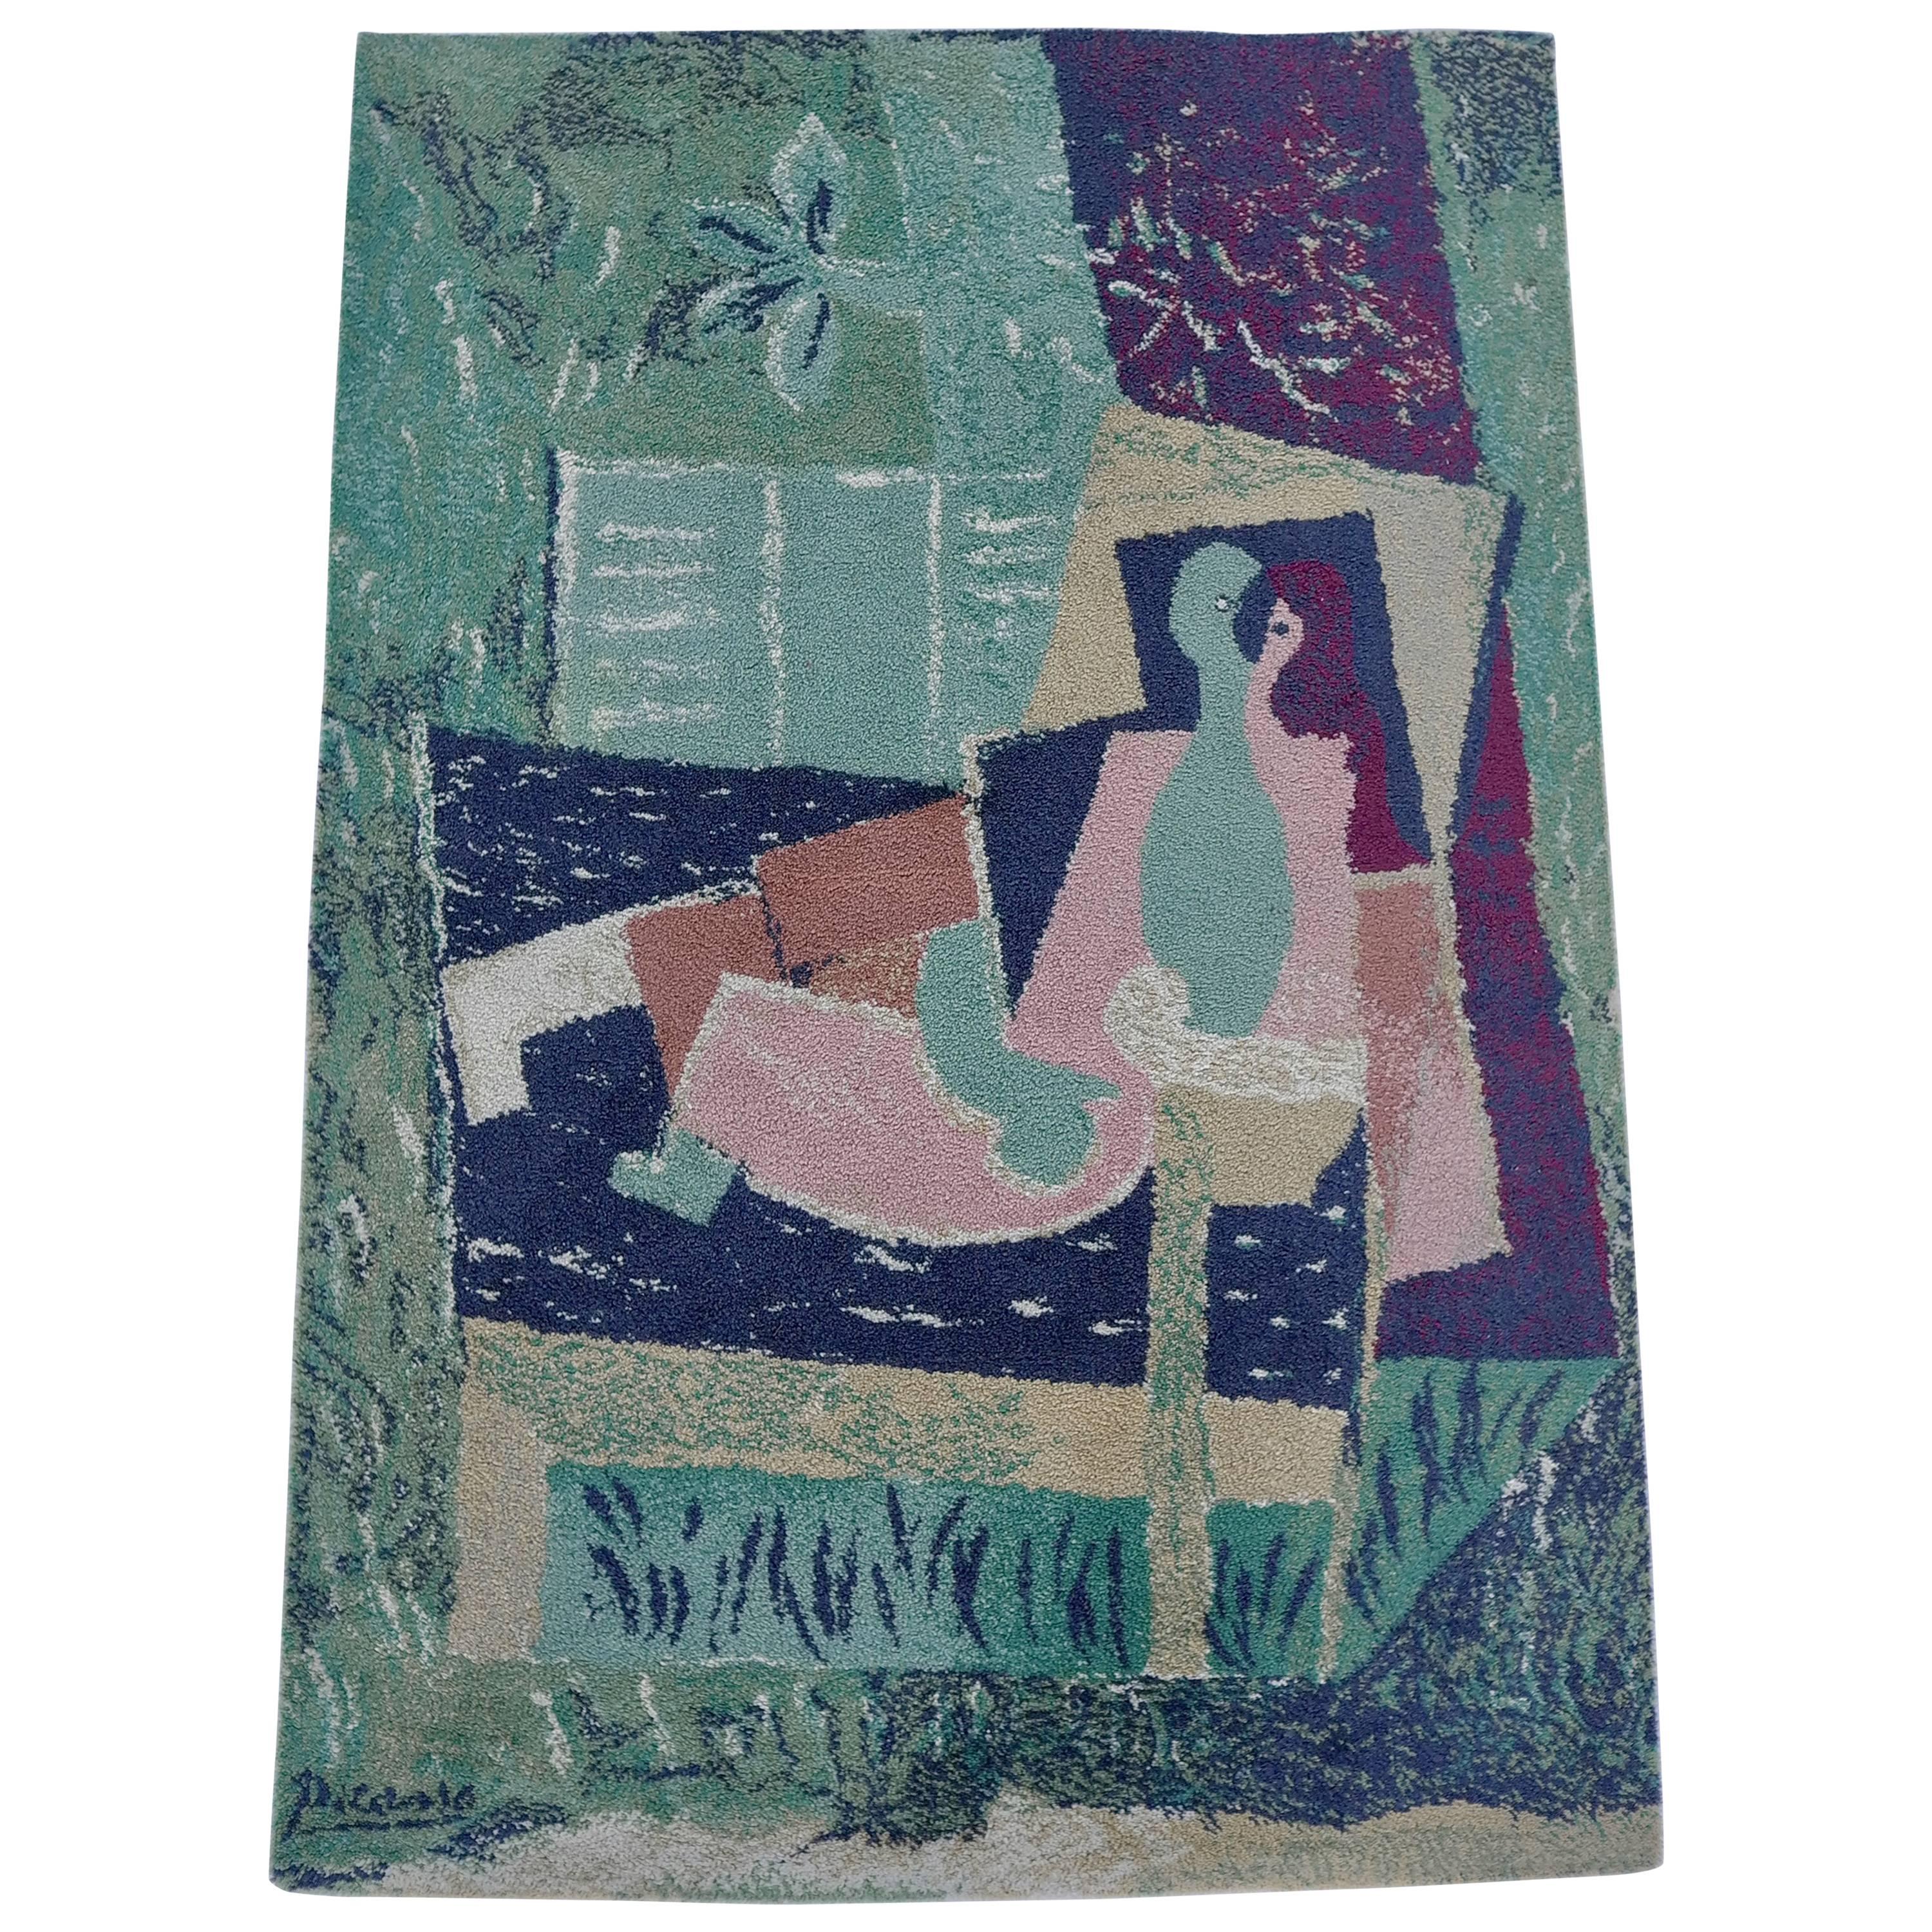 Pablo Picasso (after) "Sleeping Women with a Bird" Art Rug by Ege Axminster